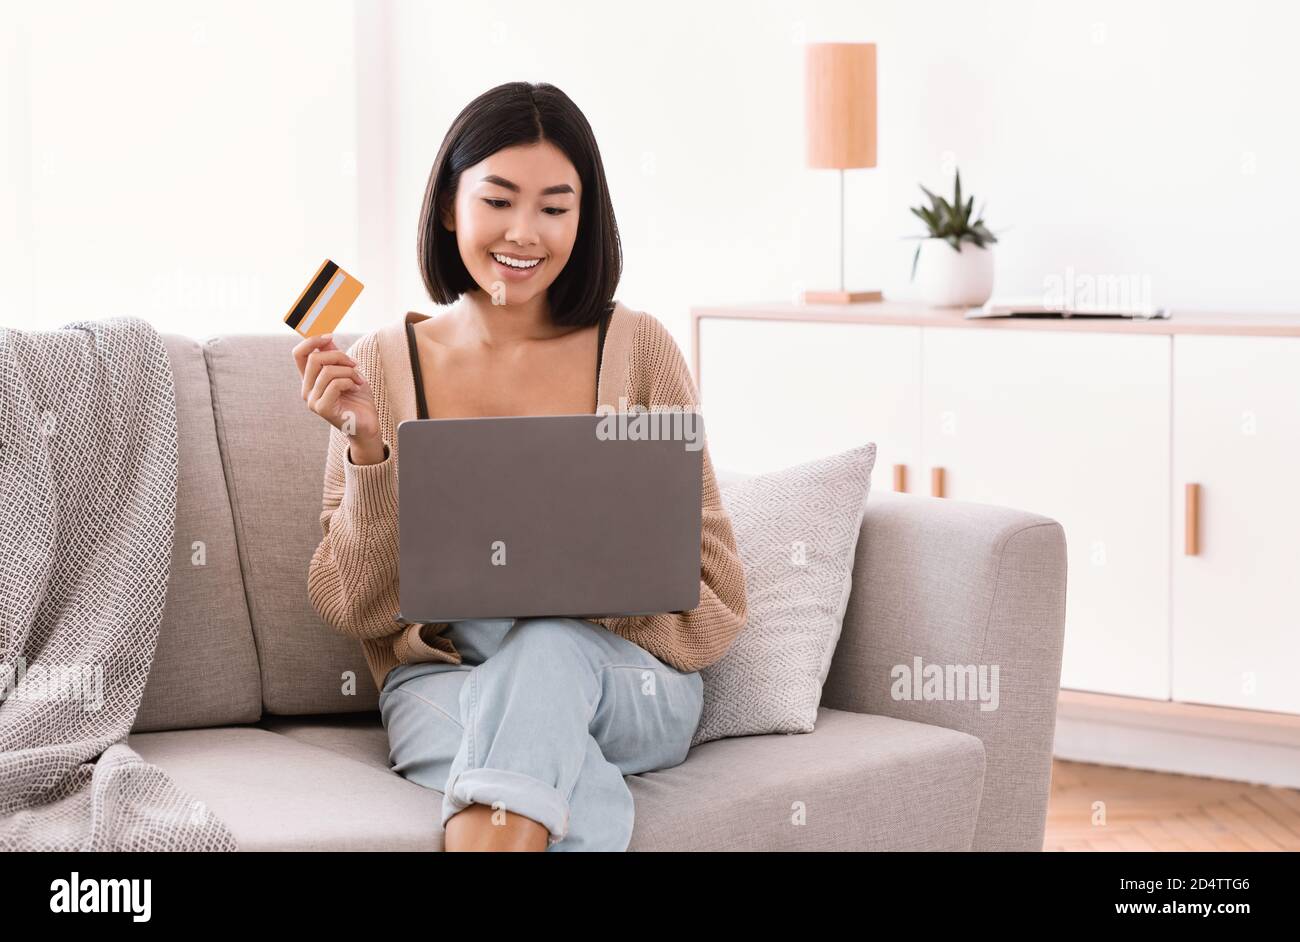 Young asian woman making purchases sitting with pc on sofa Stock Photo